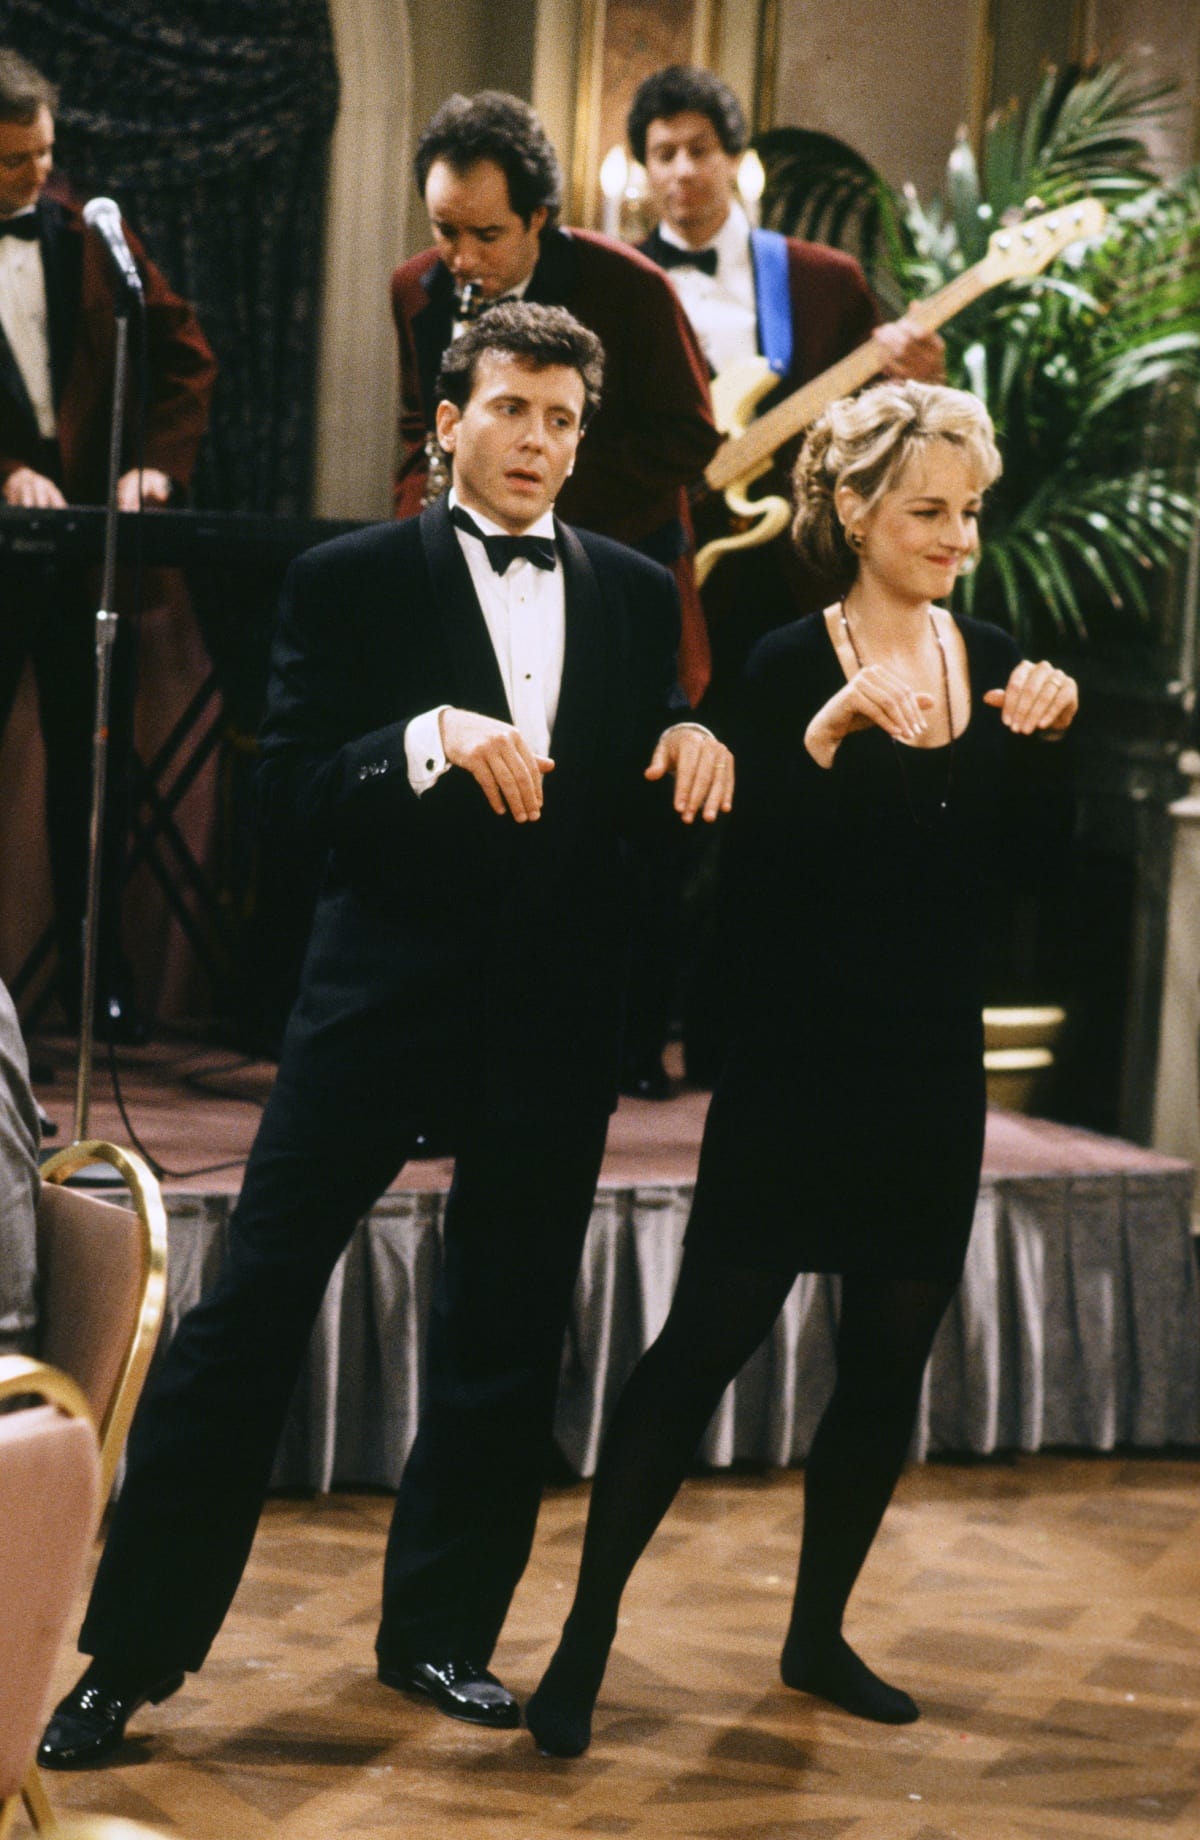 Paul Reiser as Paul Buchman and Helen Hunt as Jamie Buchman in the American television sitcom Mad About You